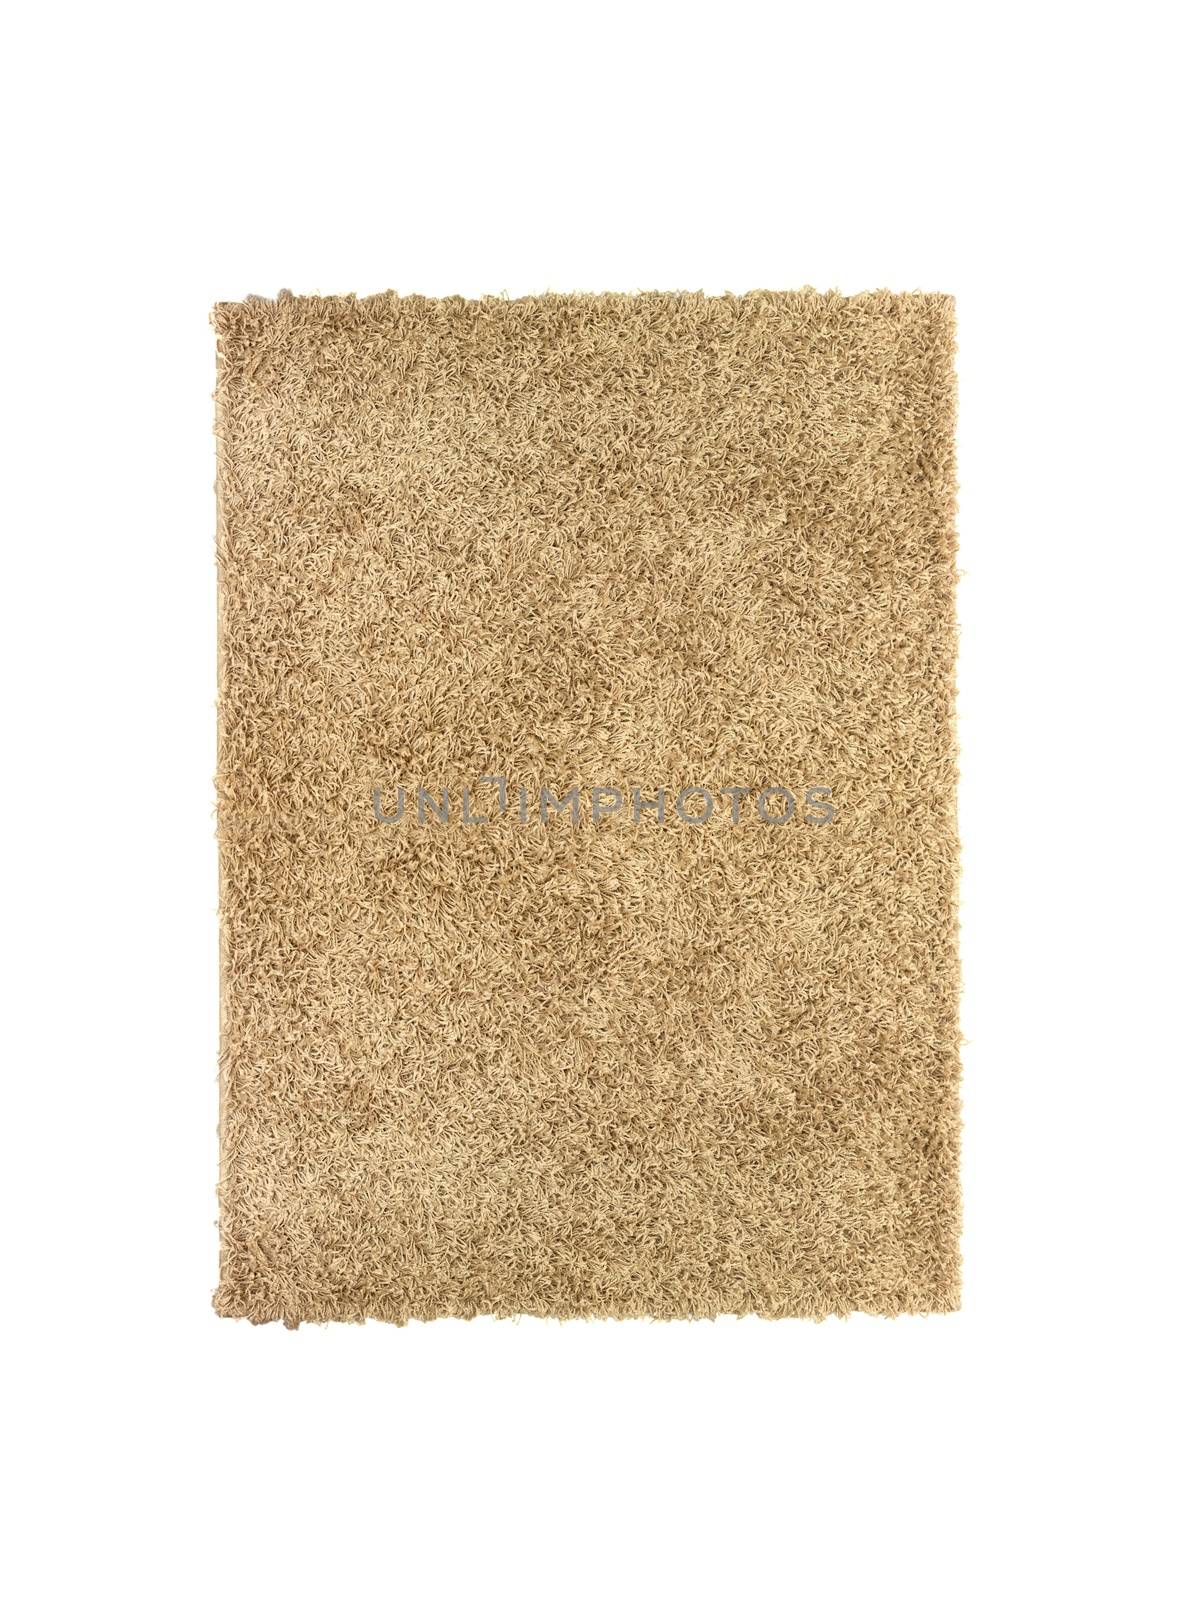 Floor Rug by Kitch